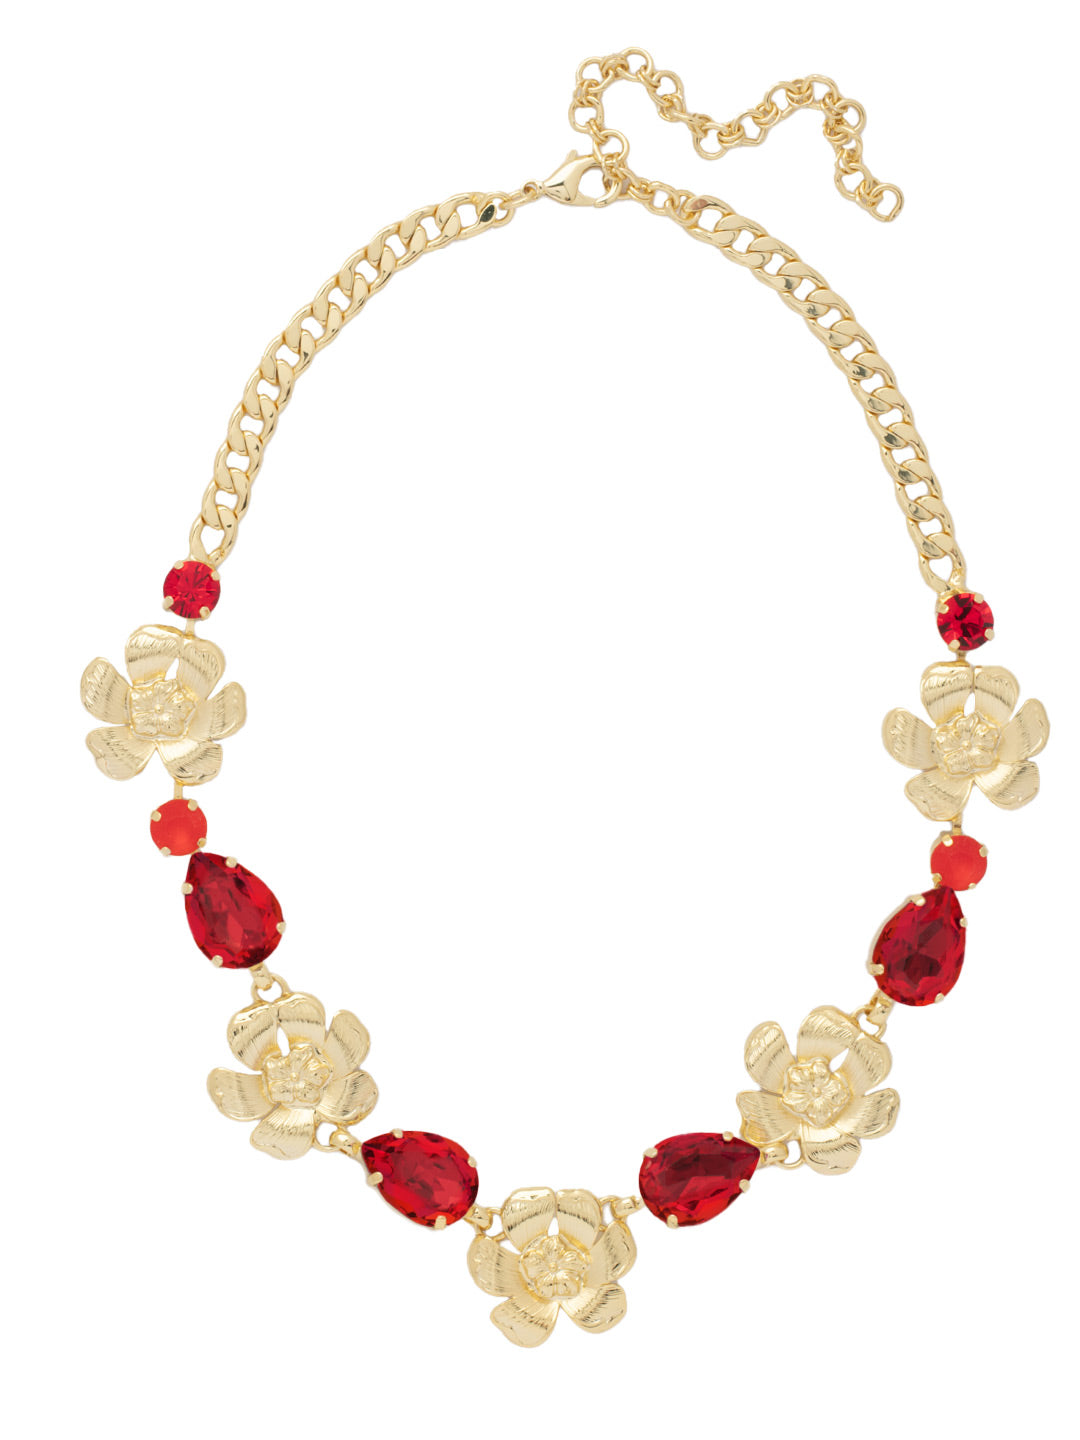 Fleur Statement Necklace - NFL12BGFIS - <p>The Fleur Statement Necklace features metal flower designs and assorted crystals on a trendy adjustable curb chain, secured by a lobster claw clasp. From Sorrelli's Fireside collection in our Bright Gold-tone finish.</p>